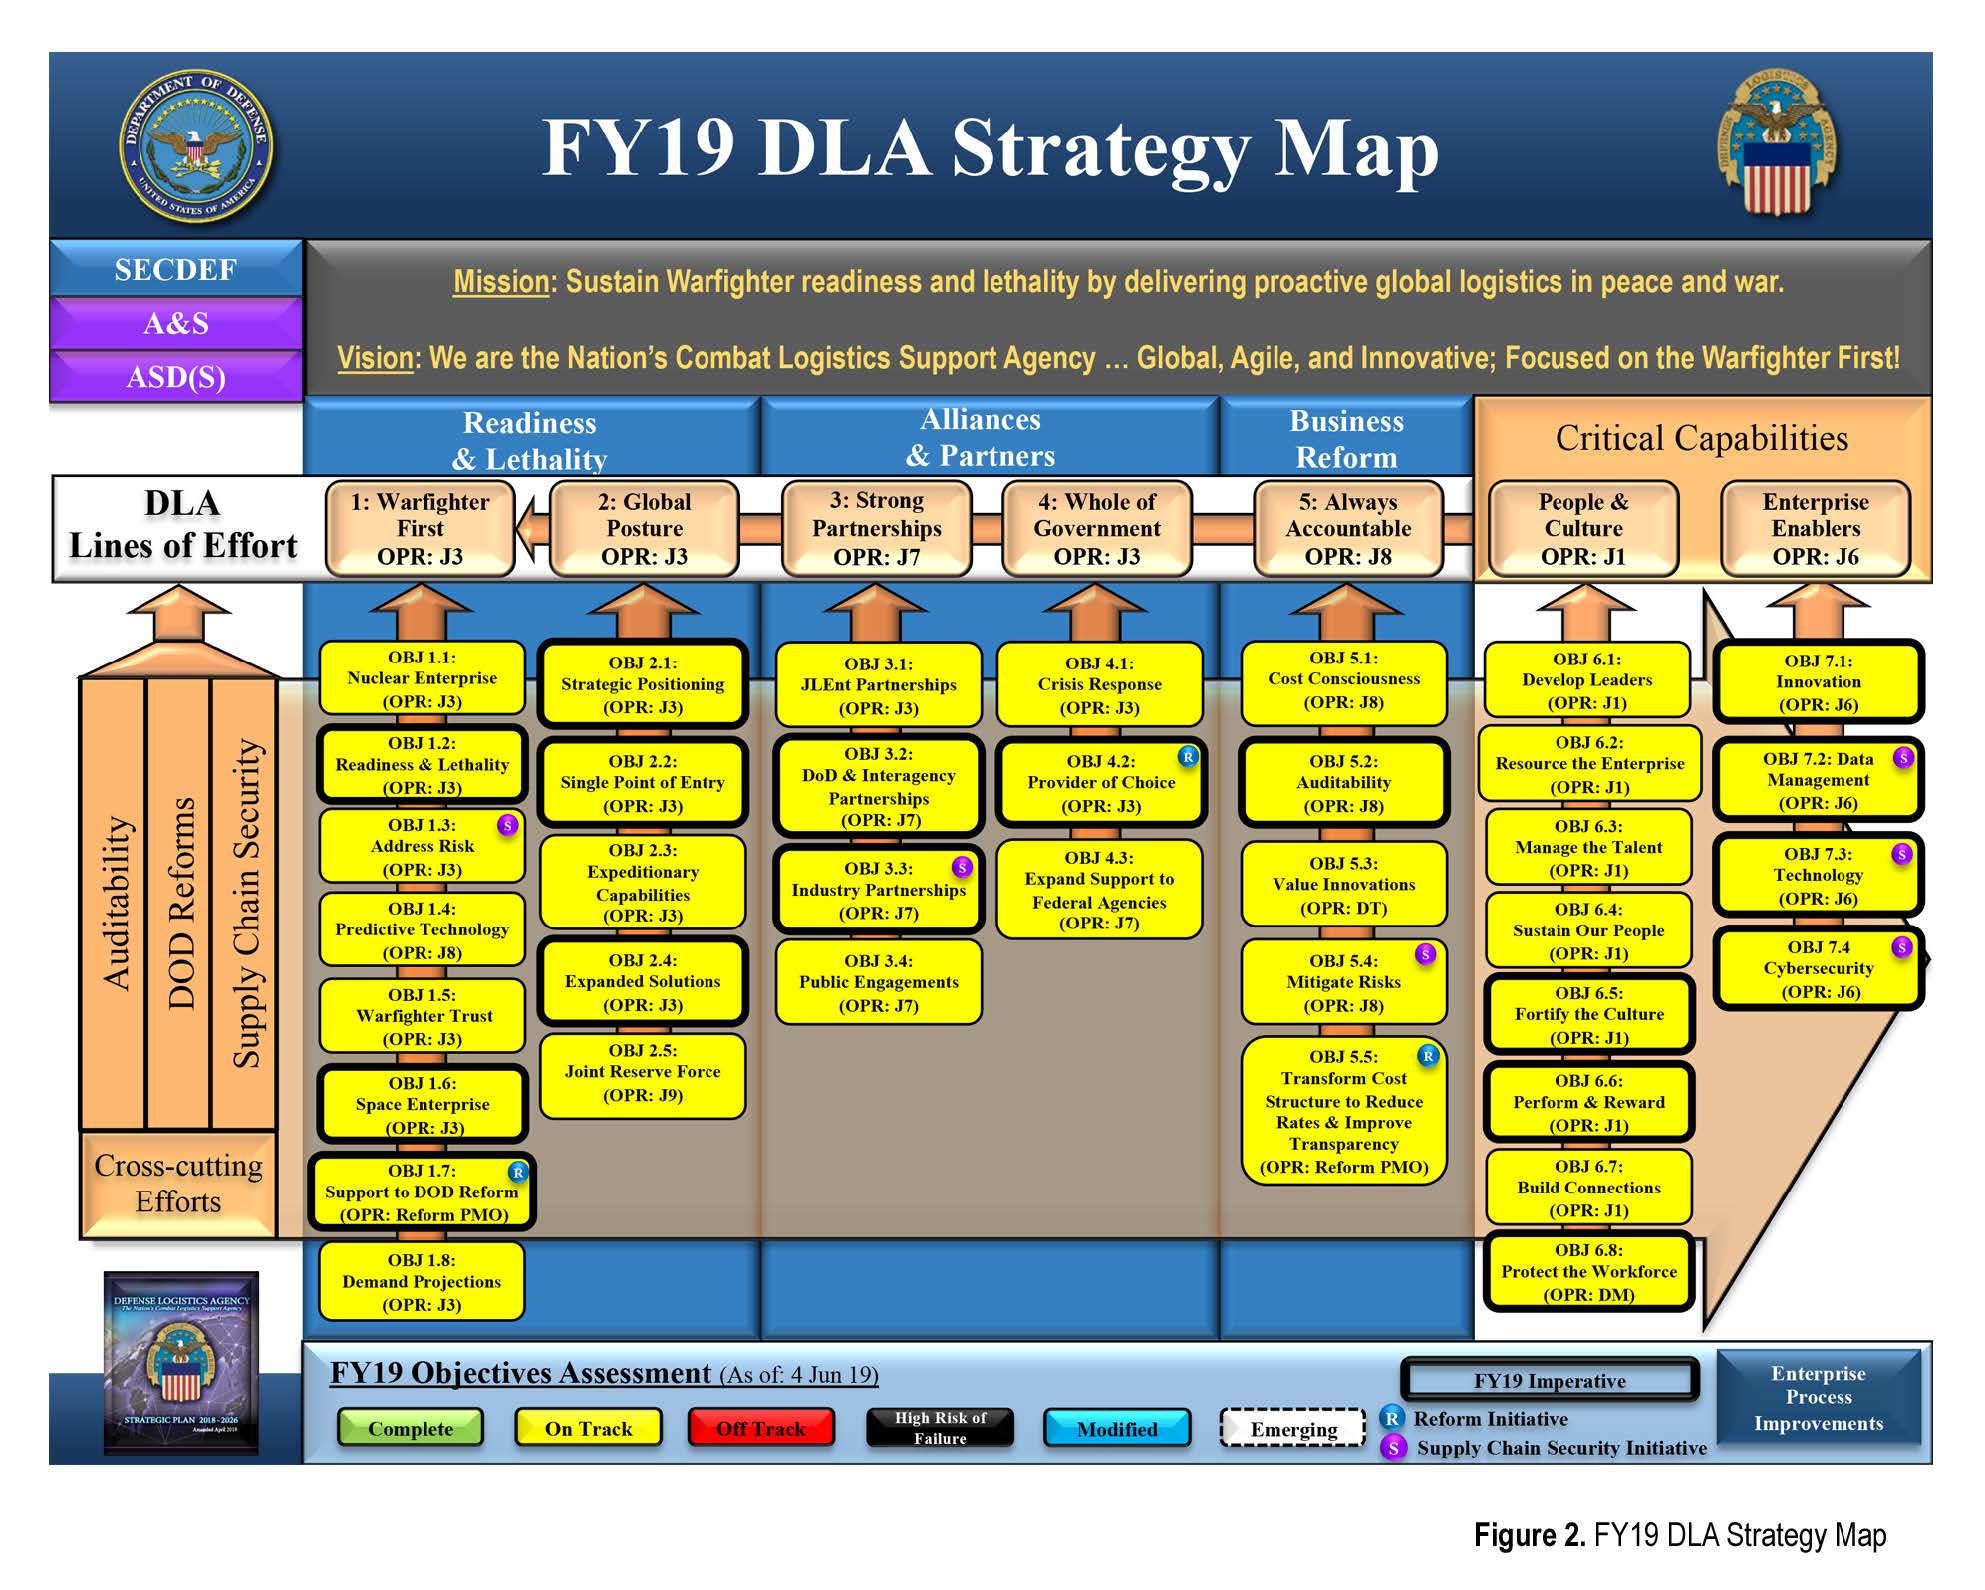 A chart showing the various Strategic Plan objectives and which lines of effort they support